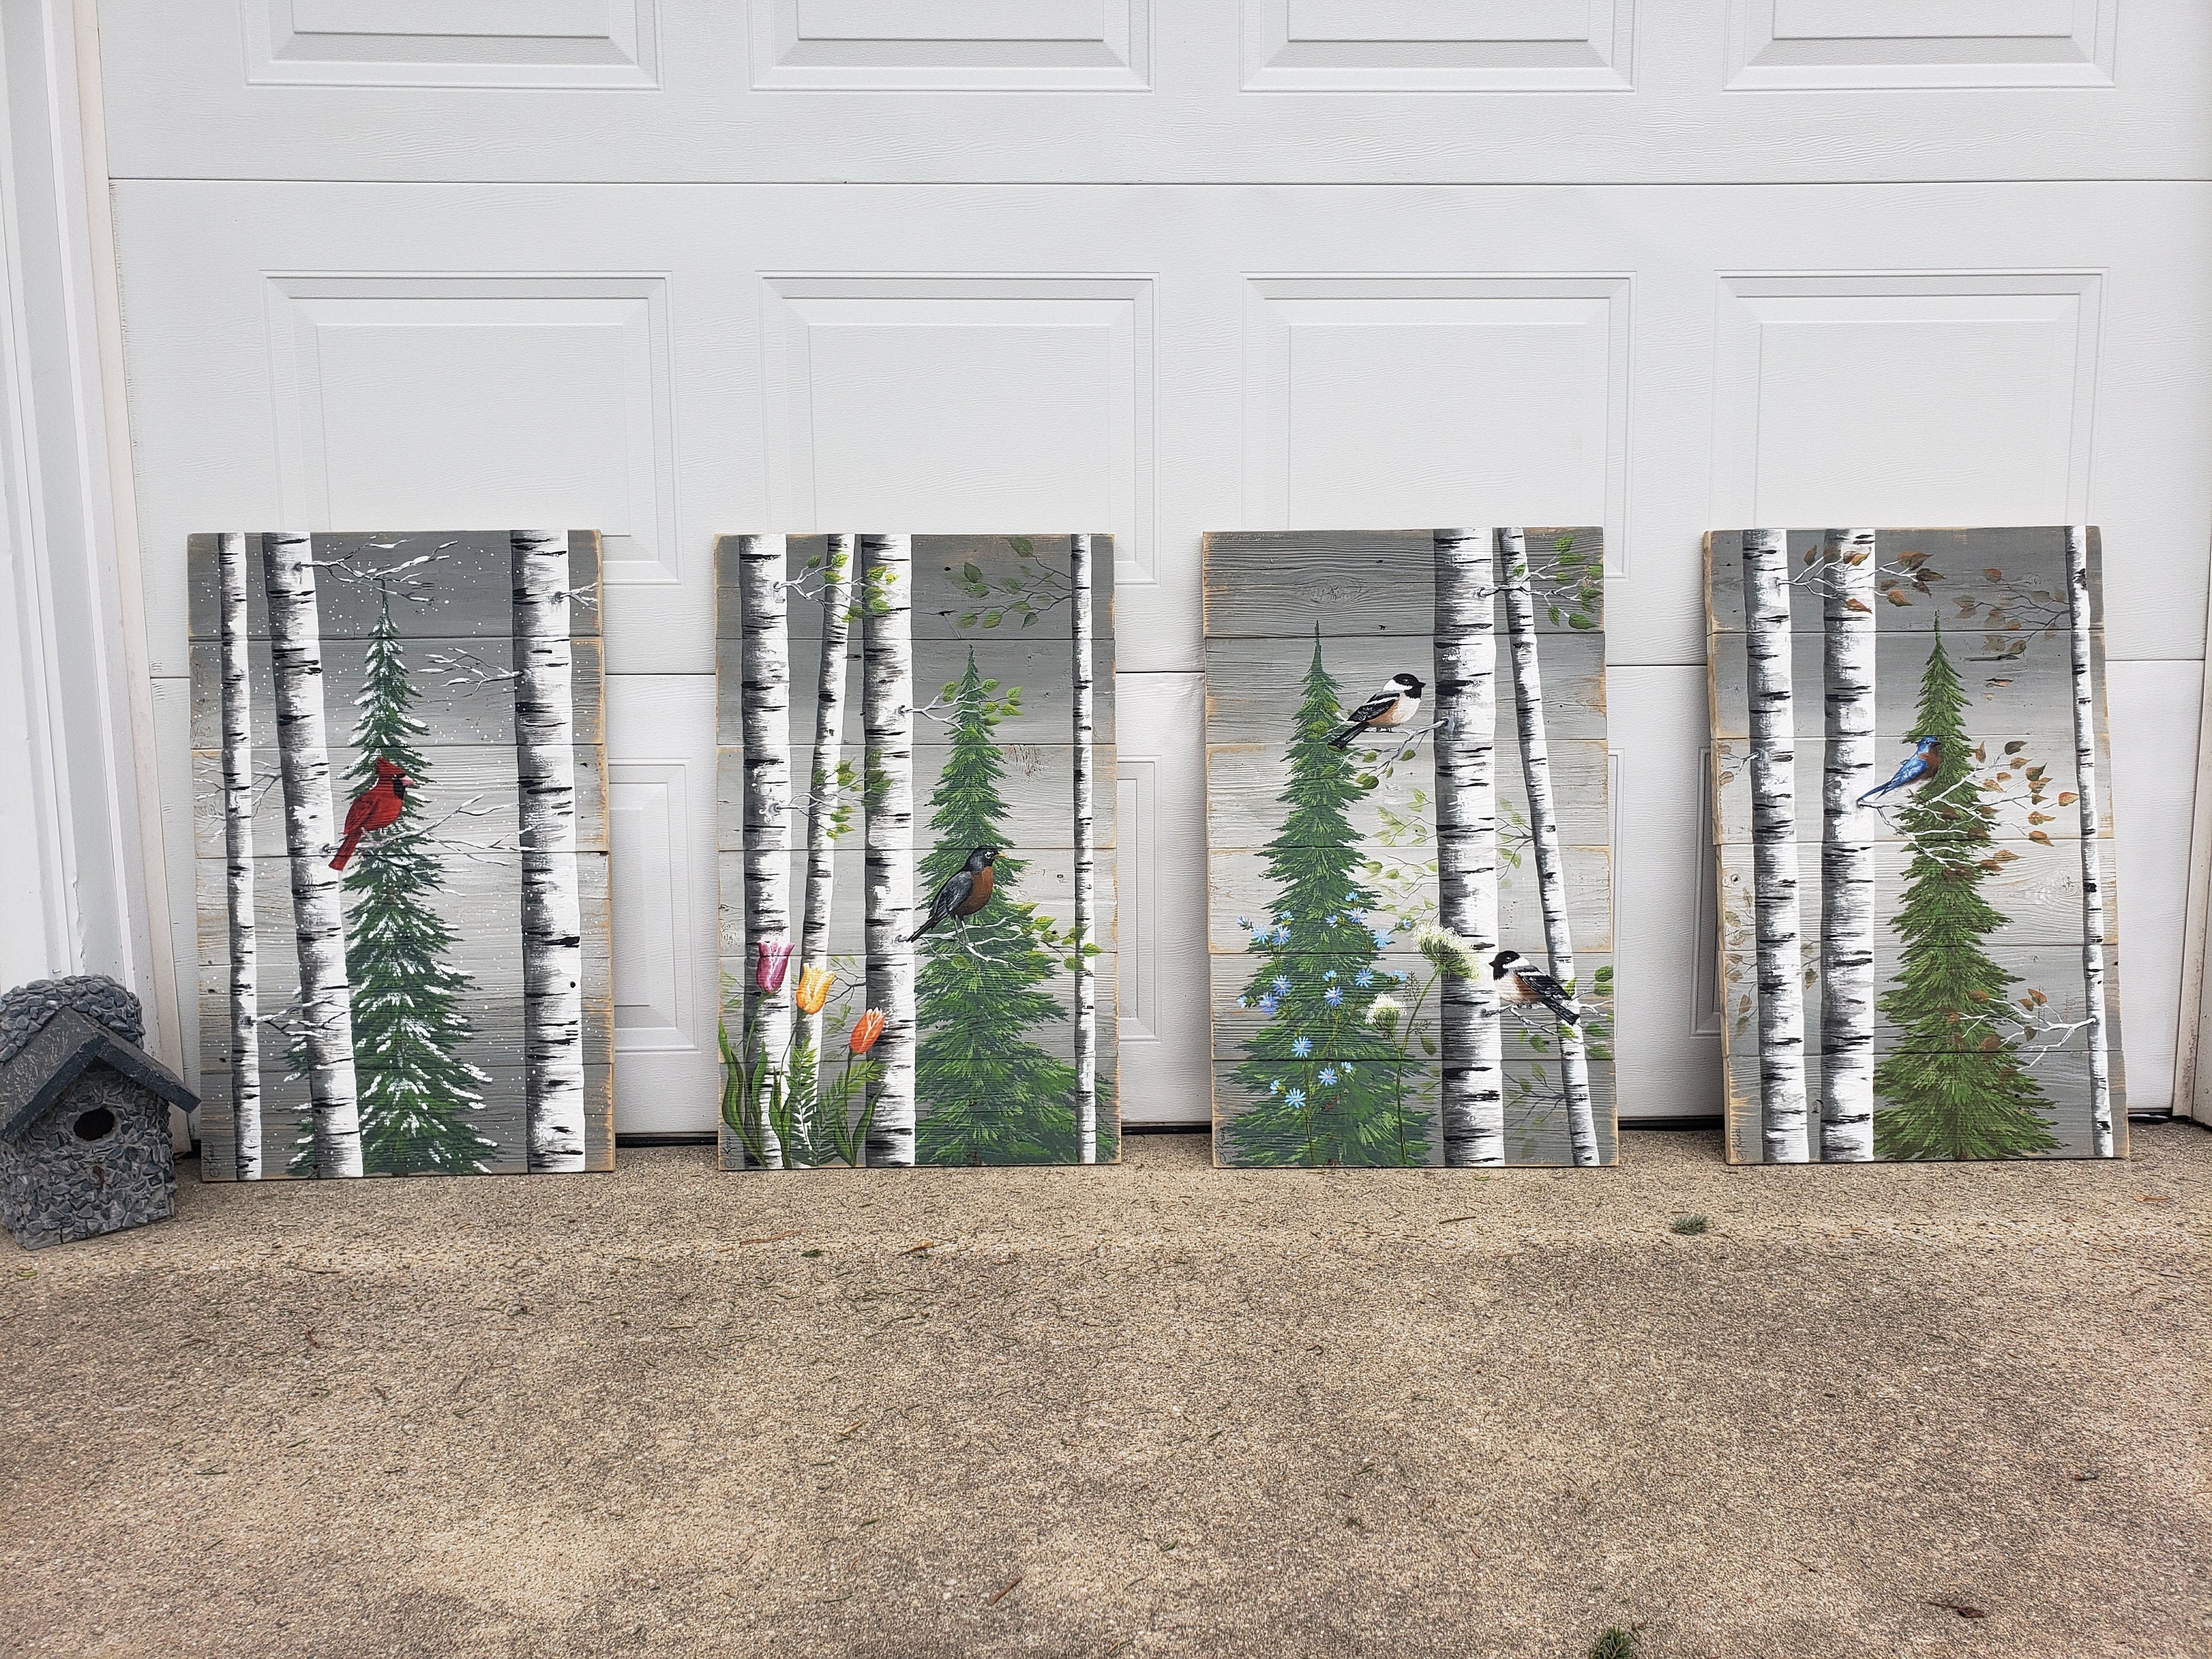 Large Couch living room art grouping, 4 Seasons paintings, white birch Paintings on pallet wood